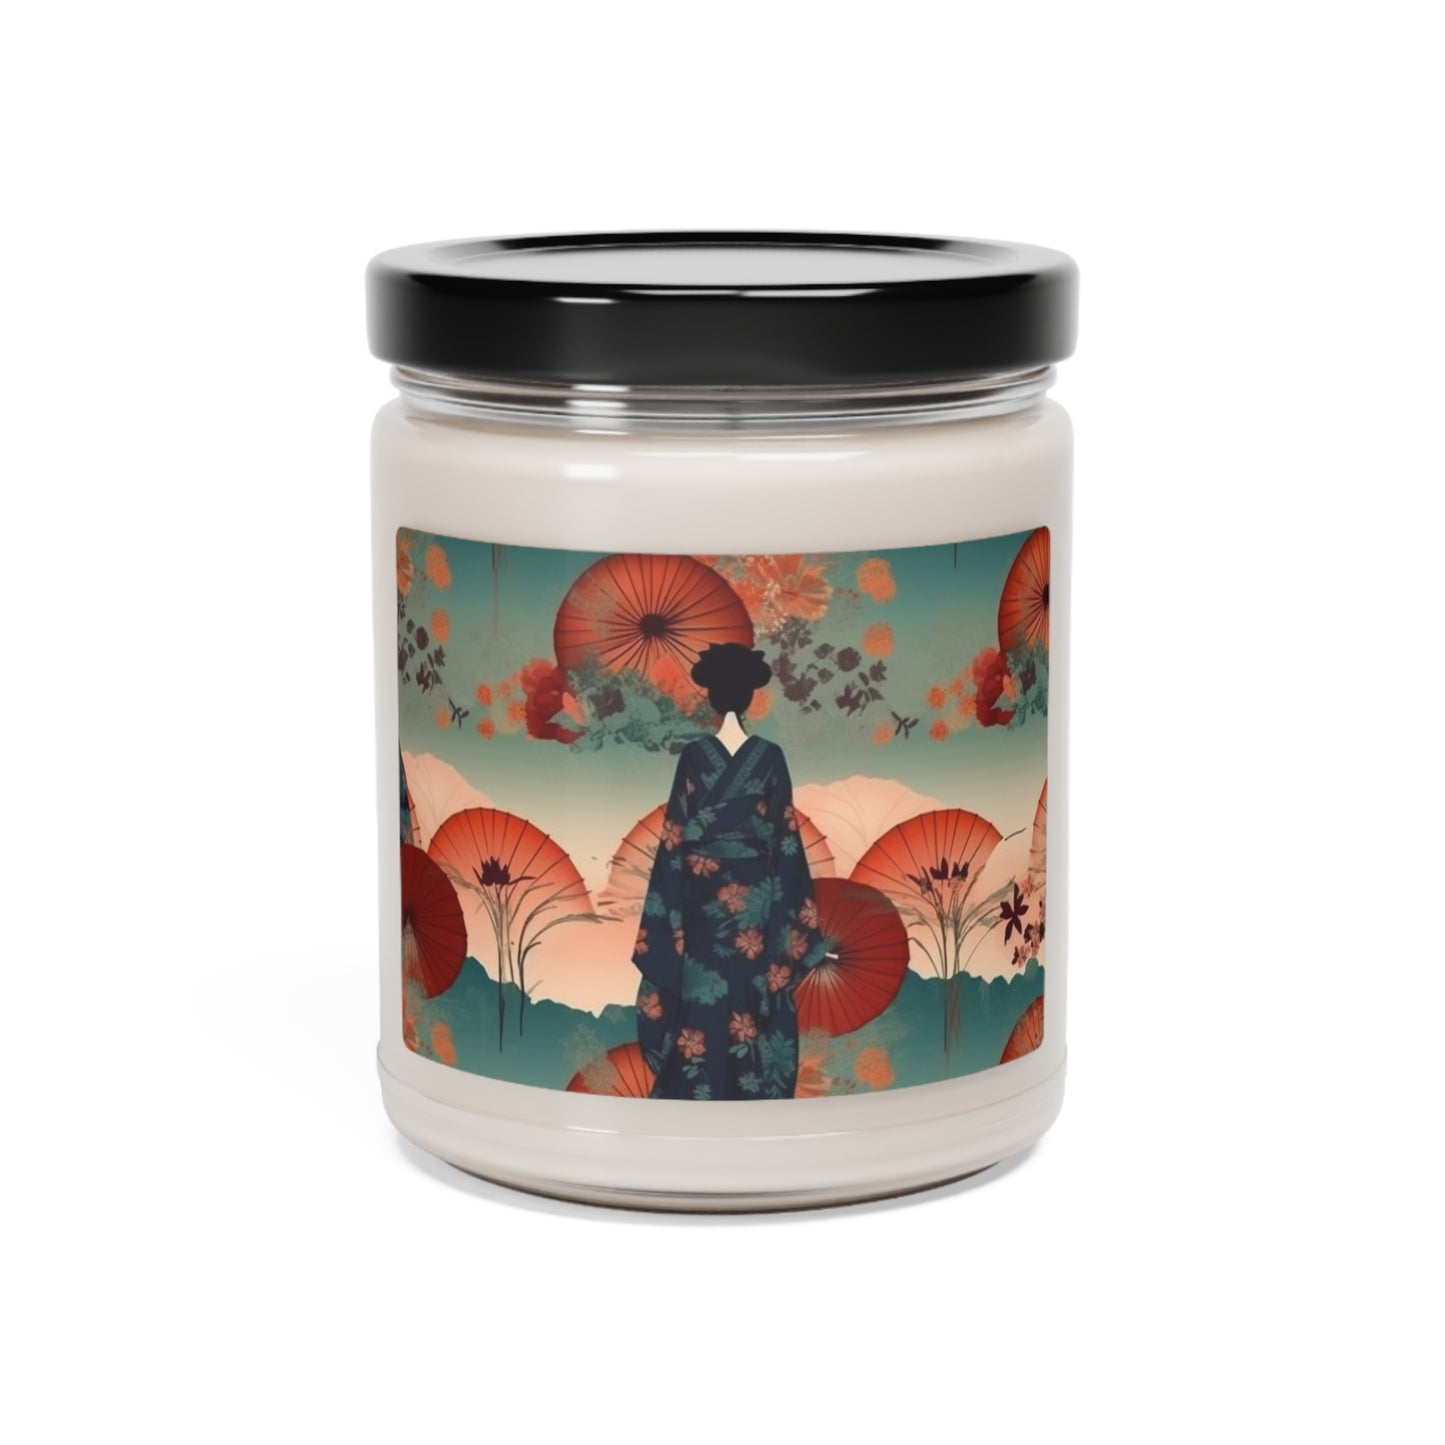 Fashionable Kimono-Inspired Scented Soy Candle: Unleash Your Style